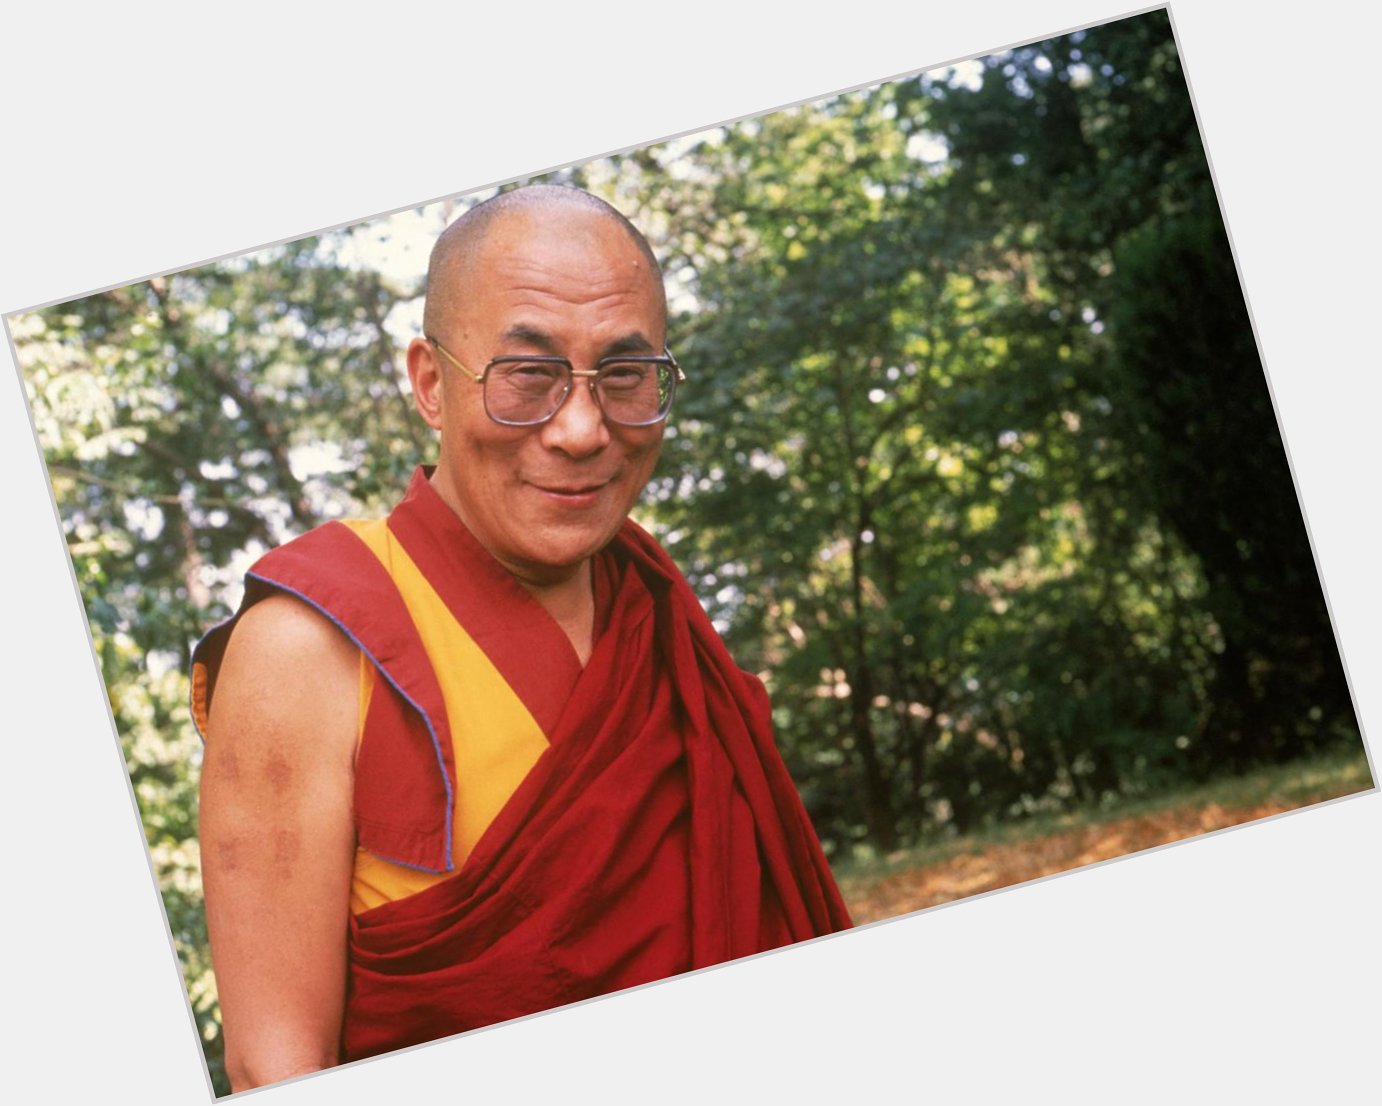 \" 8 lessons we can learn from the Dalai Lama on his 80th birthday   B-Day 